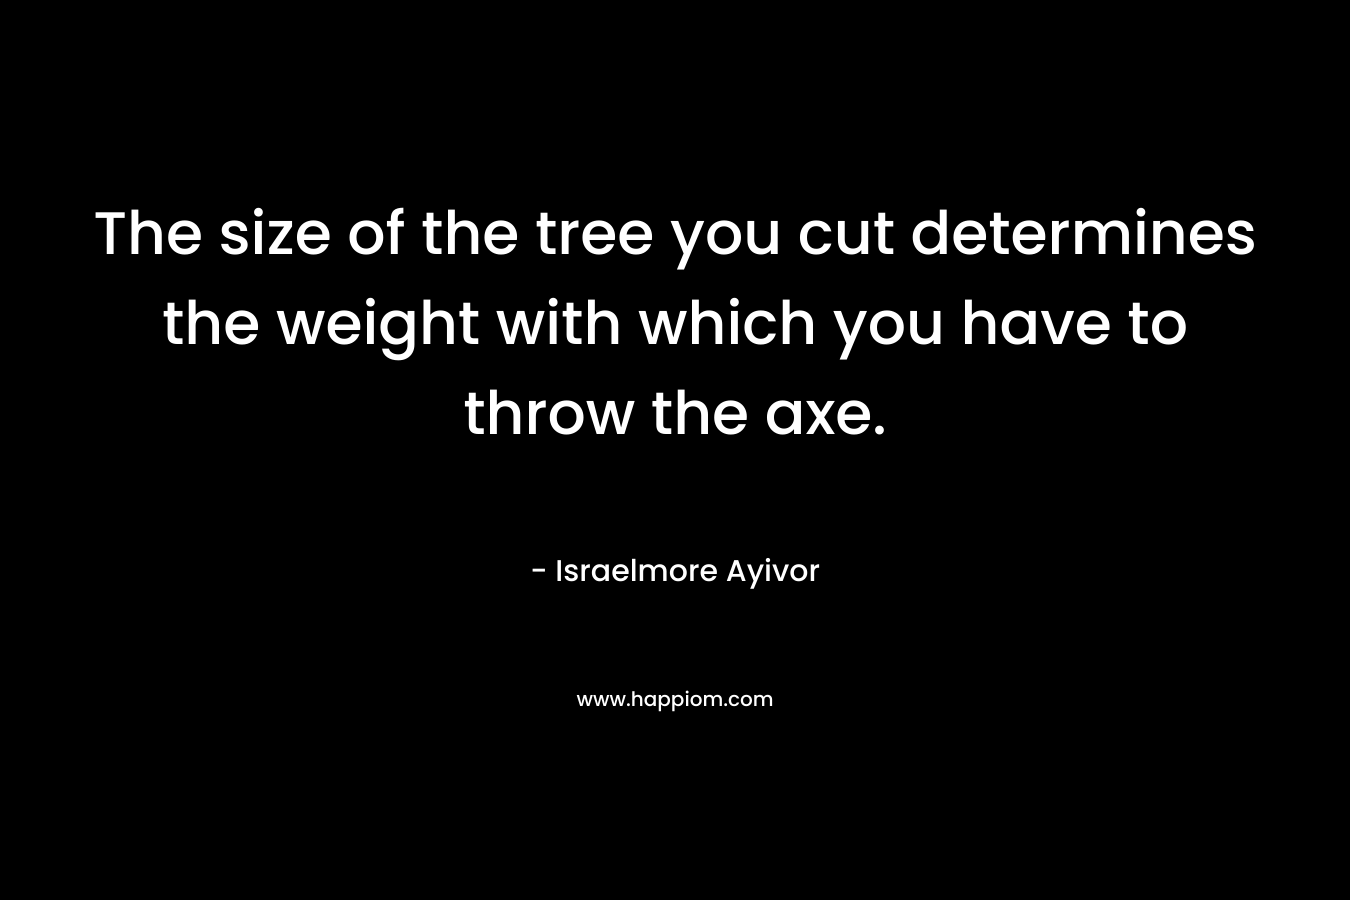 The size of the tree you cut determines the weight with which you have to throw the axe. – Israelmore Ayivor